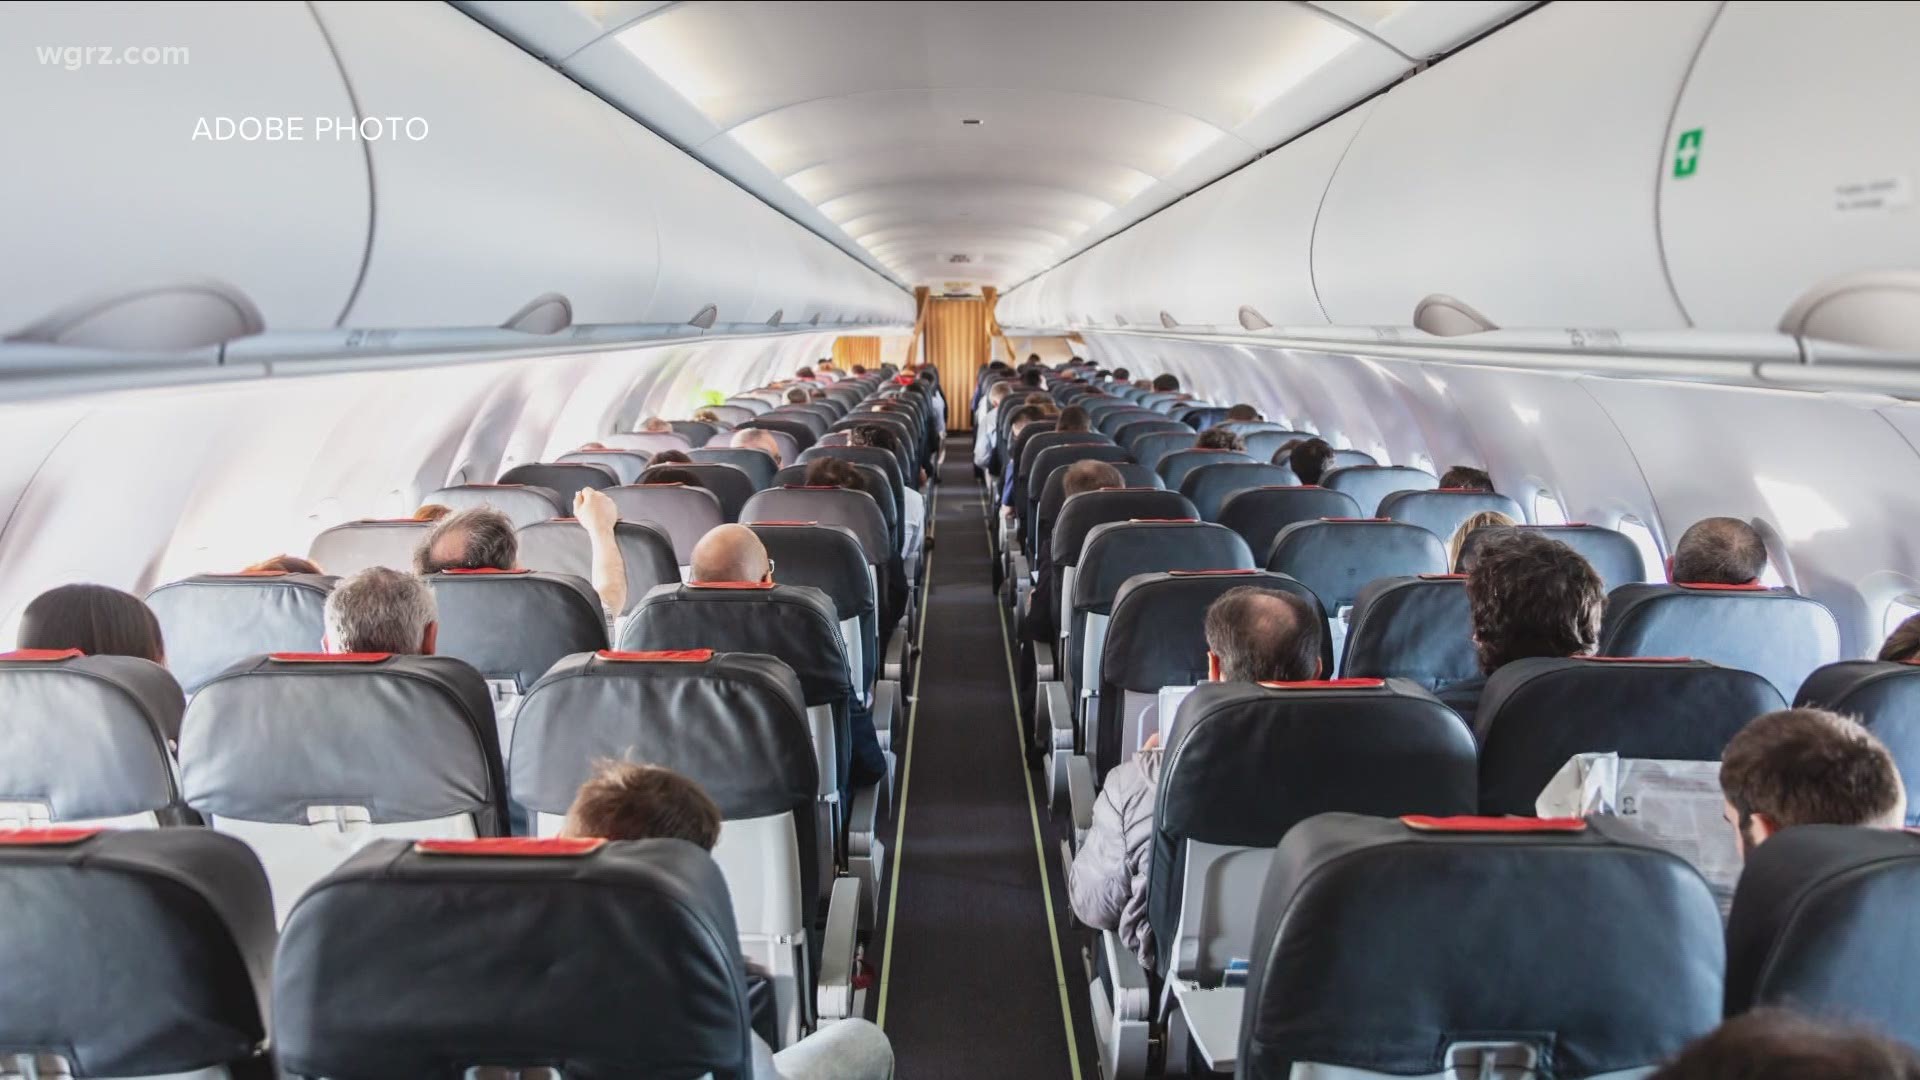 Our VERIFY team looks into claim airline companies met to discuss and consider banning people who are vaccinated from flying because of the risks of blood clots.